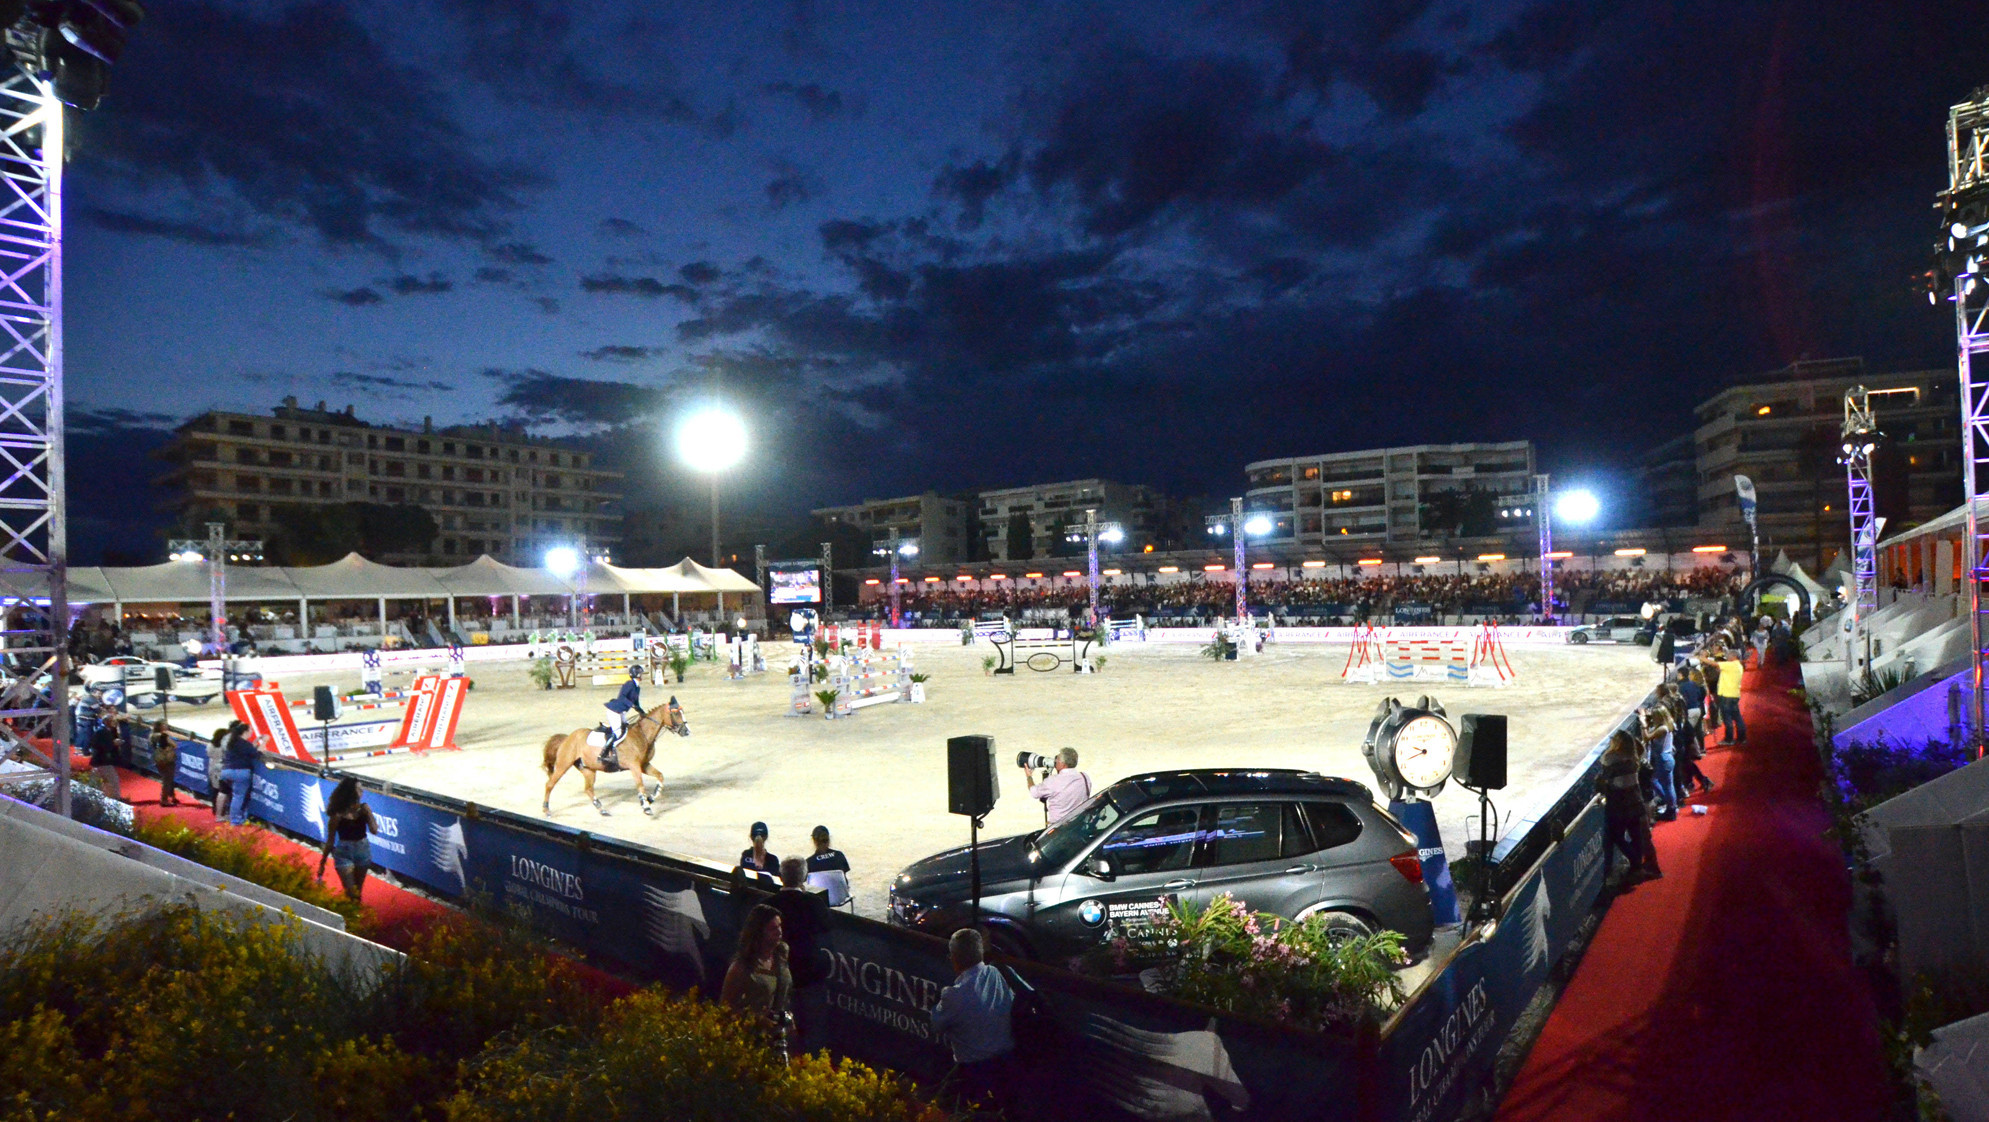 City of Stars venue in Cannes will host tomorrow's Longines Global Champions Tour event ©LGCT